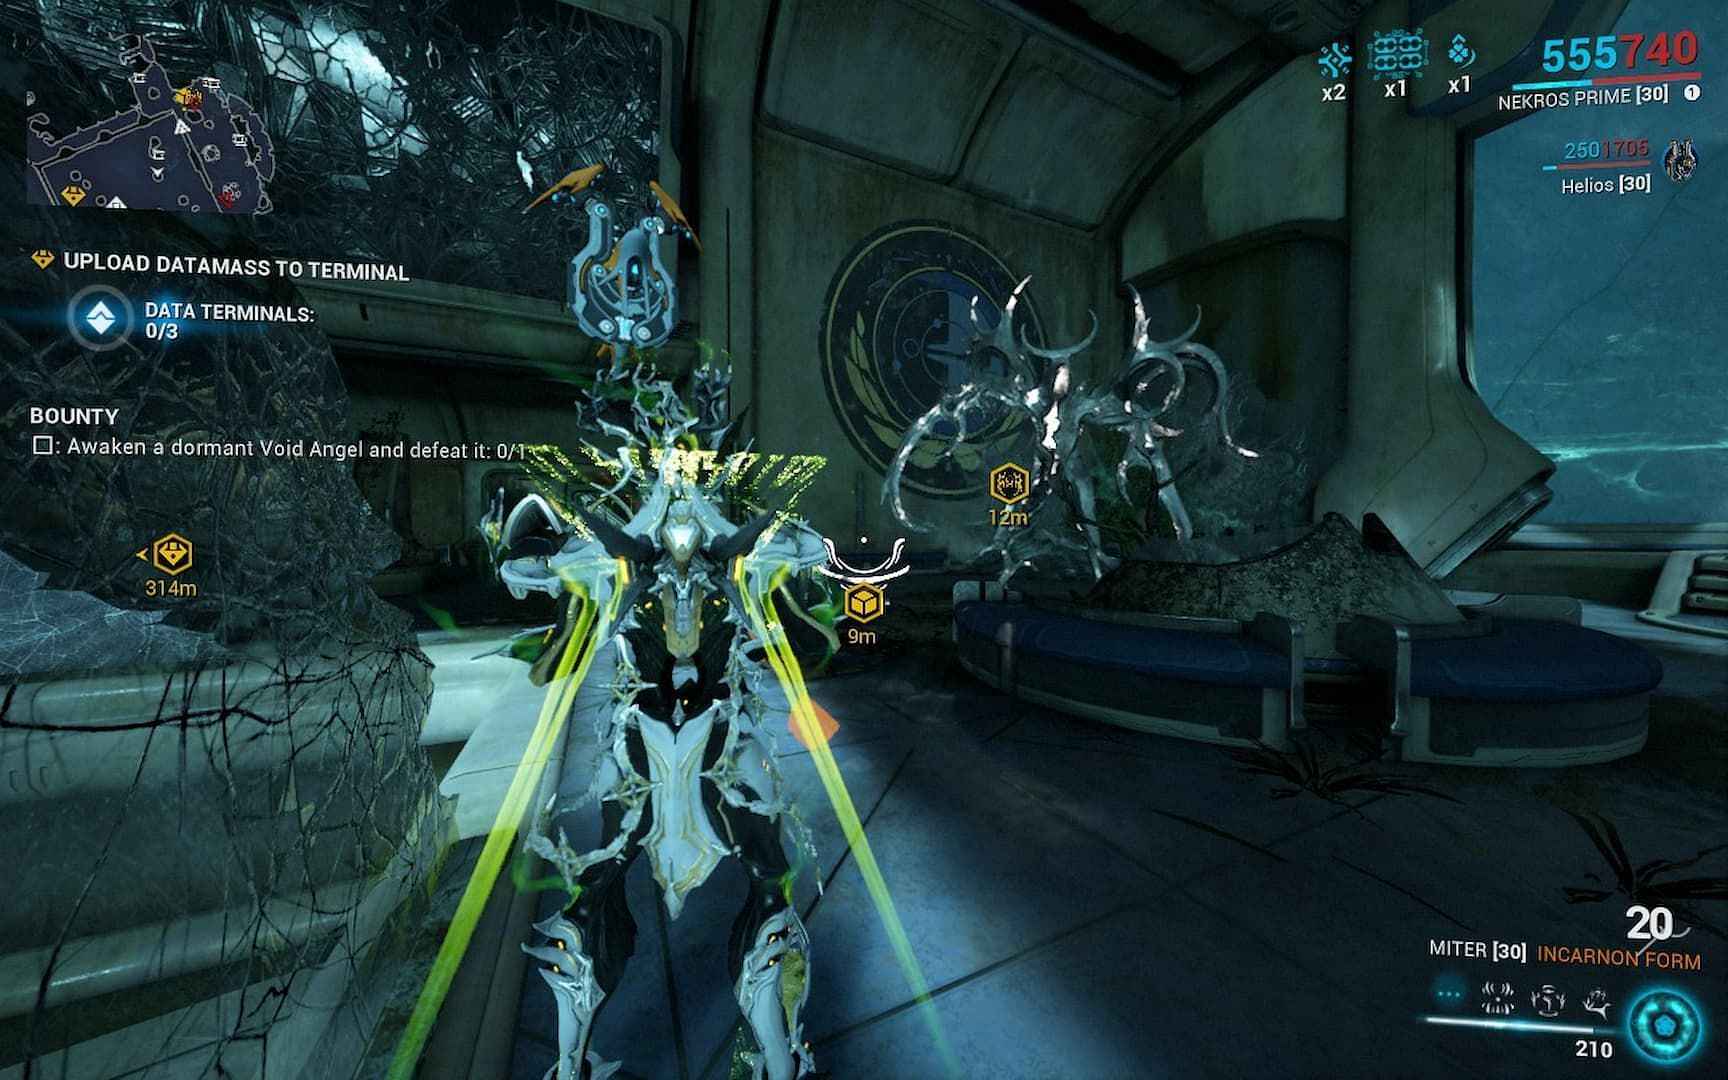 A Dormant Void Angel in Warframe (Image via Digital Extremes)